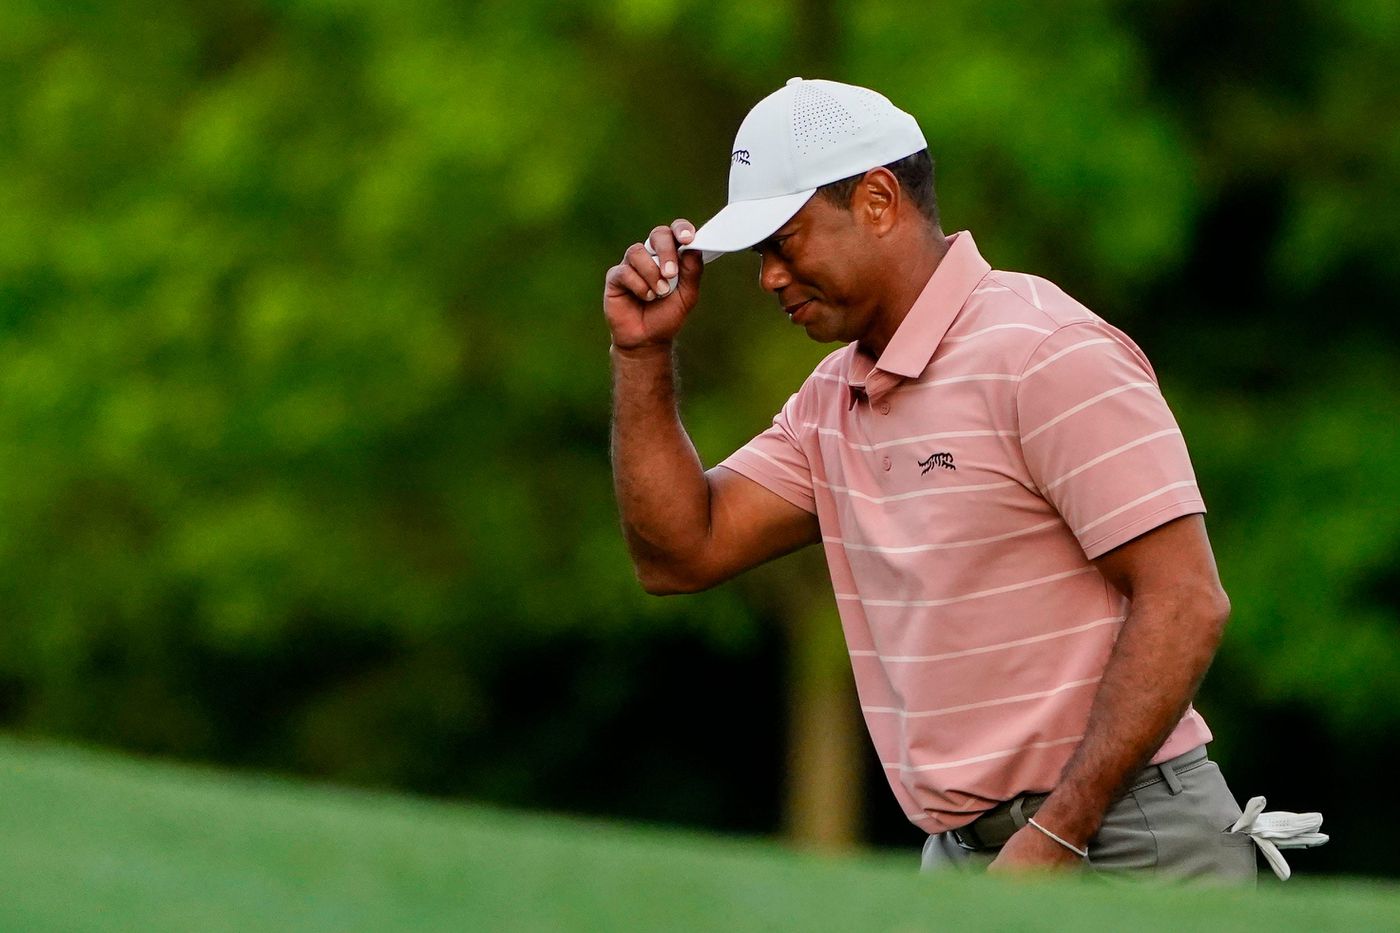 tiger woods’ stunning masters assessment of conditions, explains going lefty